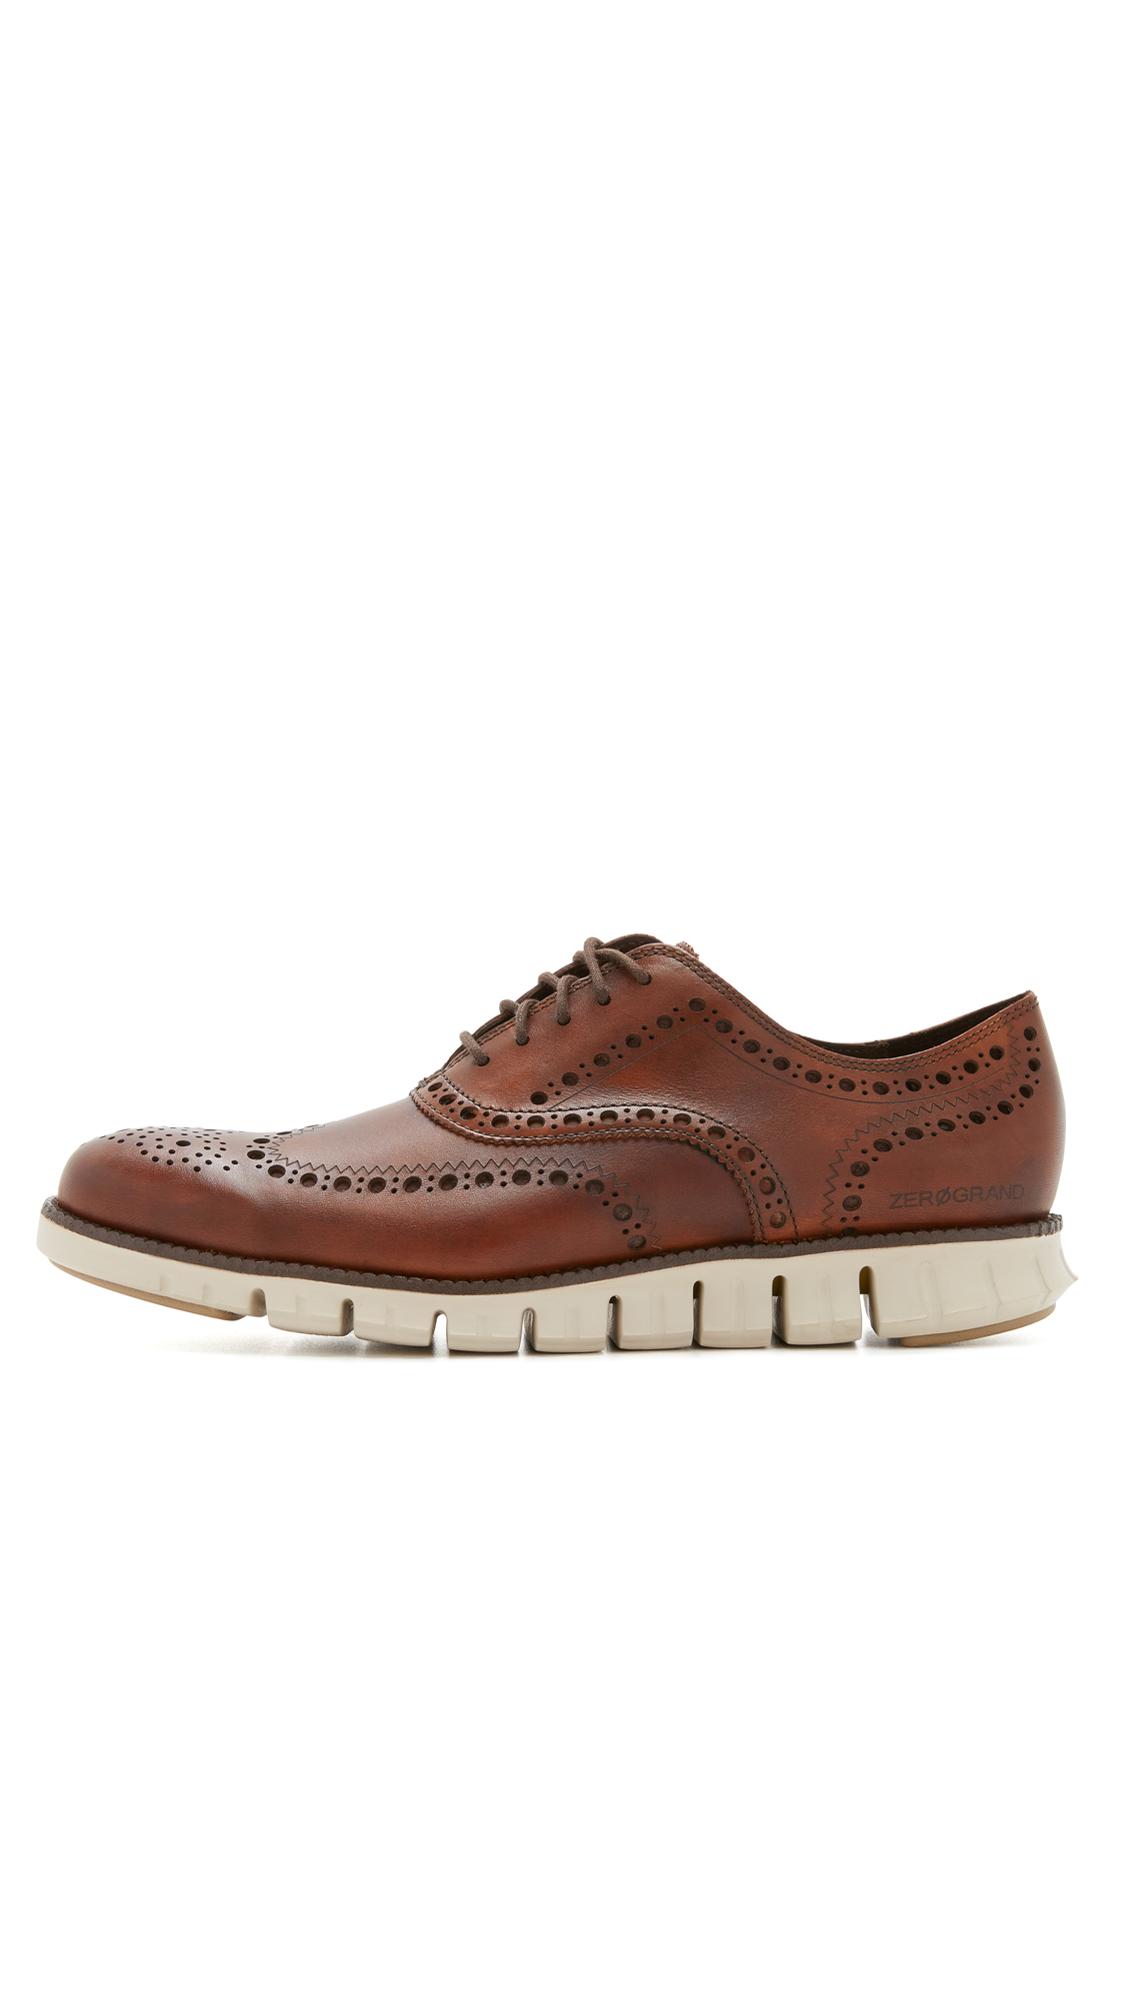 Lyst - Cole Haan Zerogrand Wingtip Oxford Shoes in Brown for Men